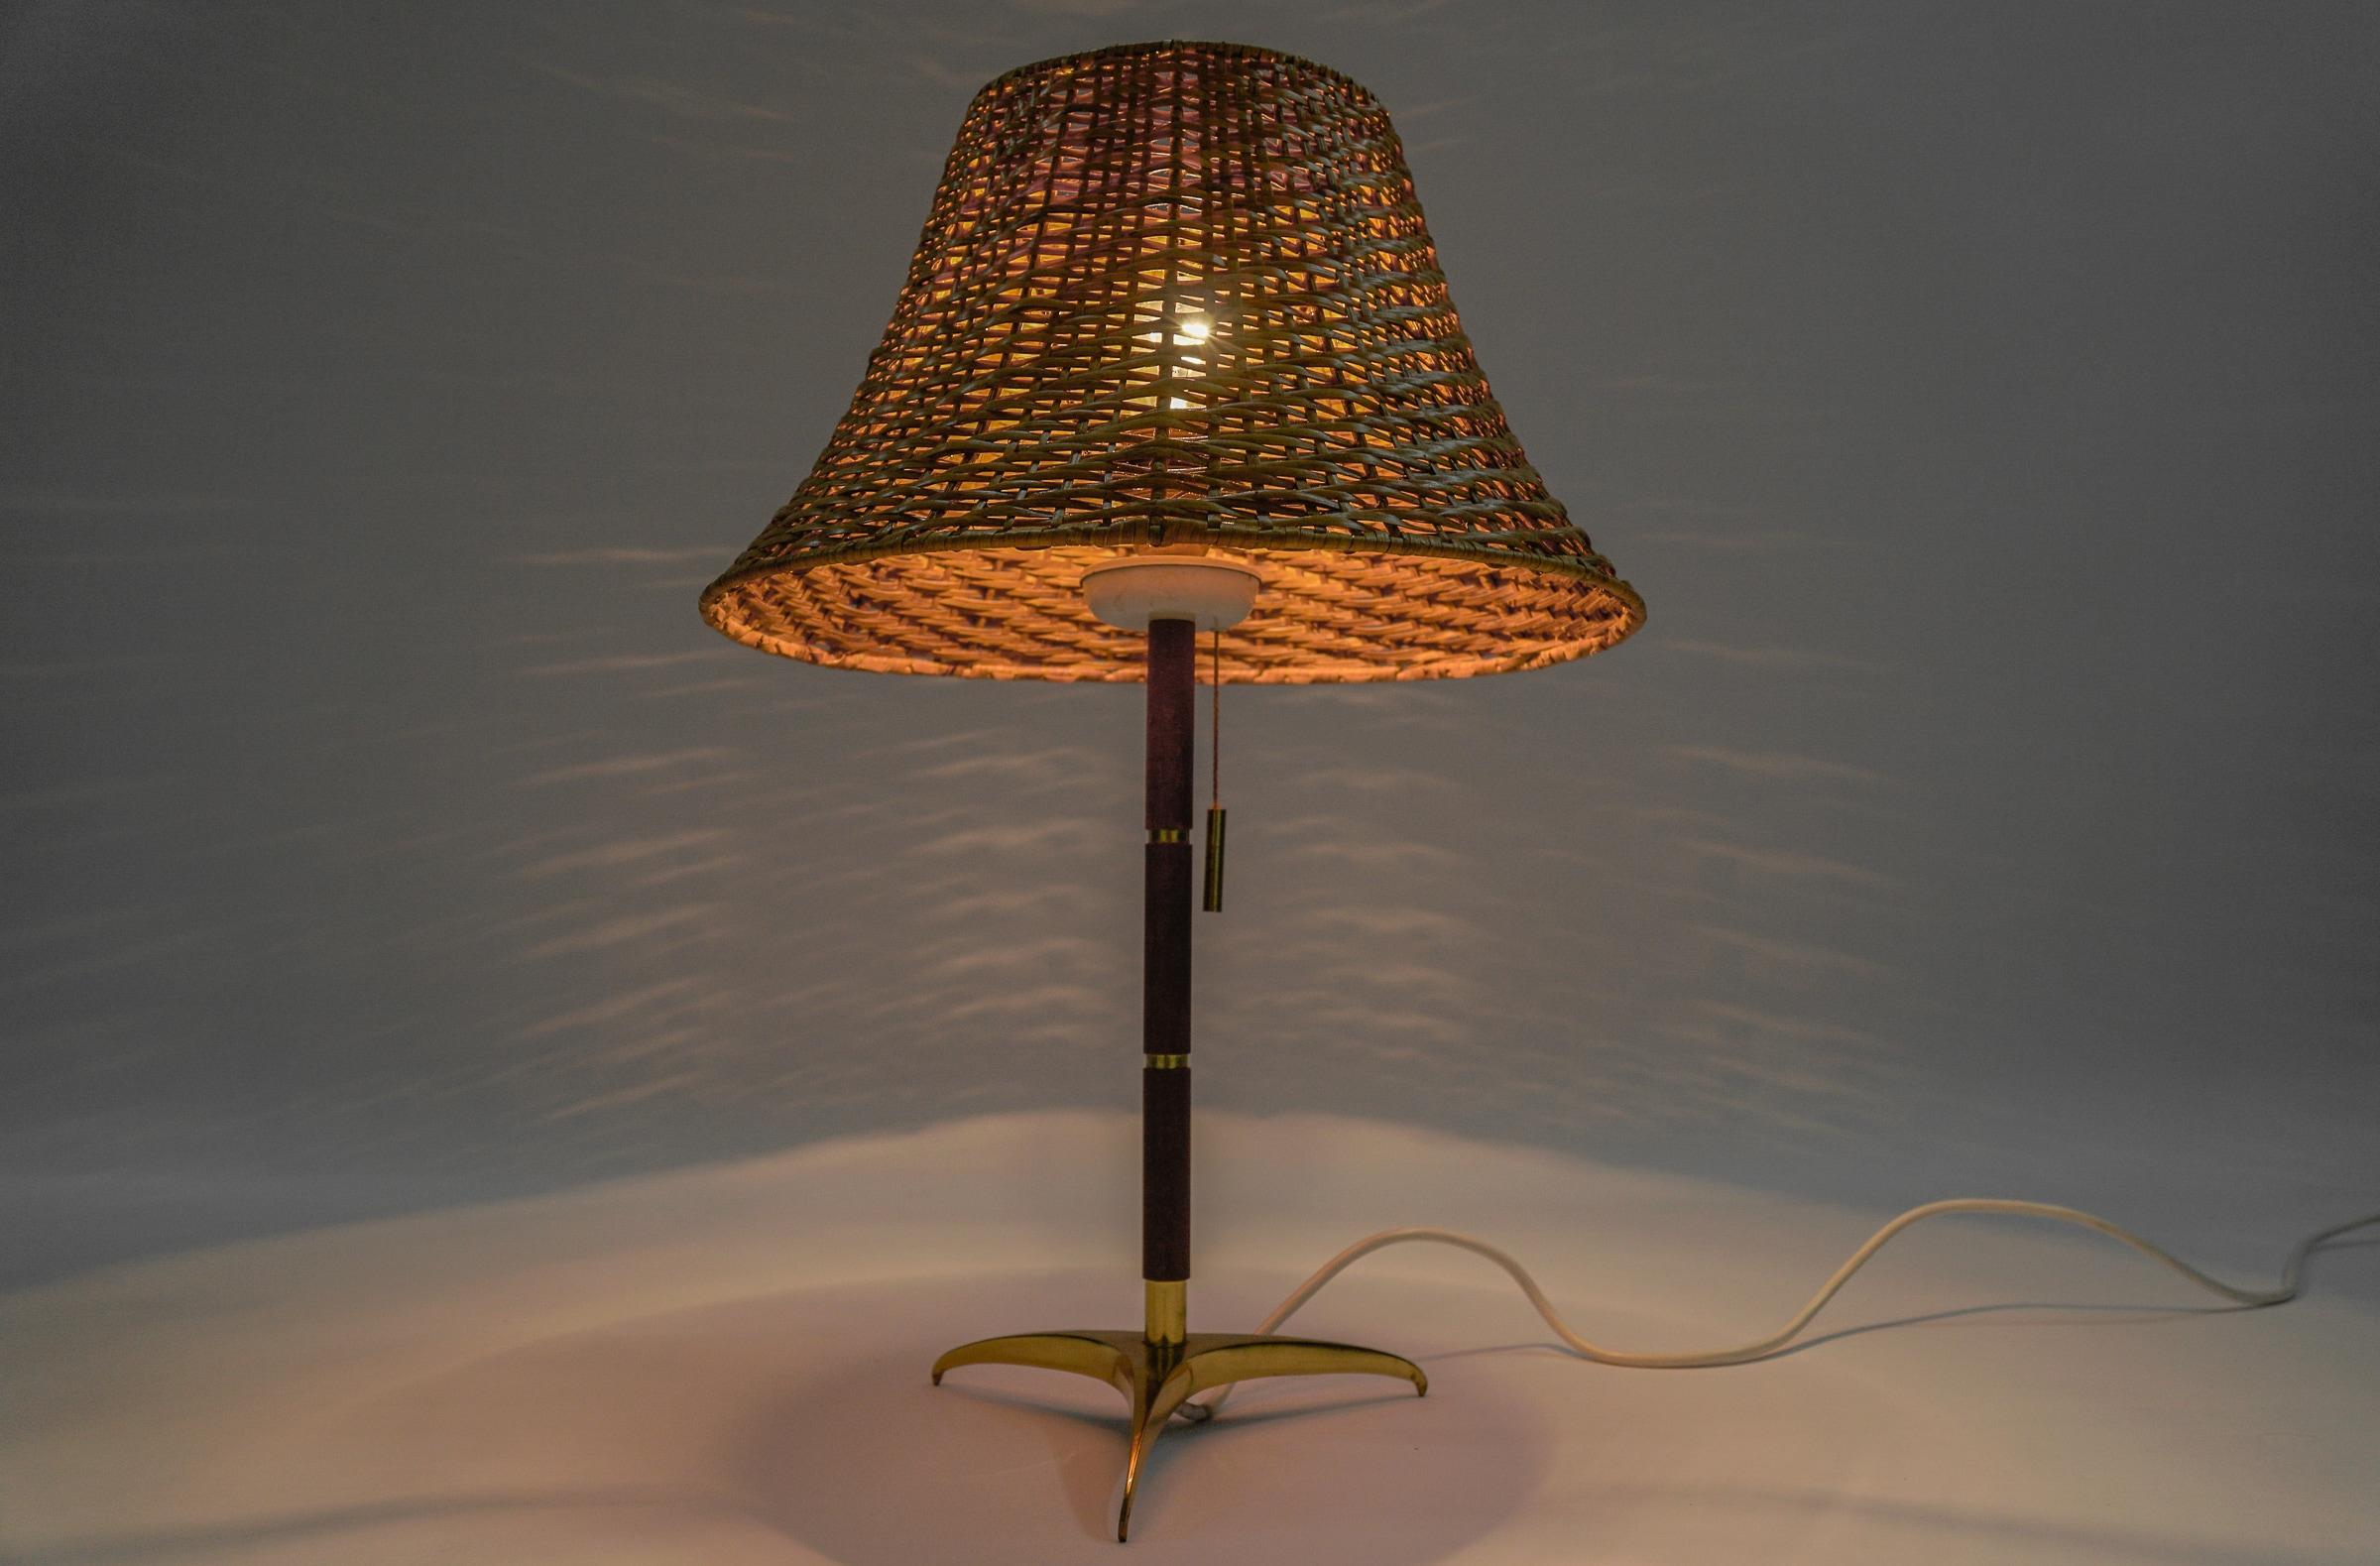 Lovely Mid-Century Modern Table Lamp in Brass, Wicker and Teak, 1950s, Austria For Sale 3